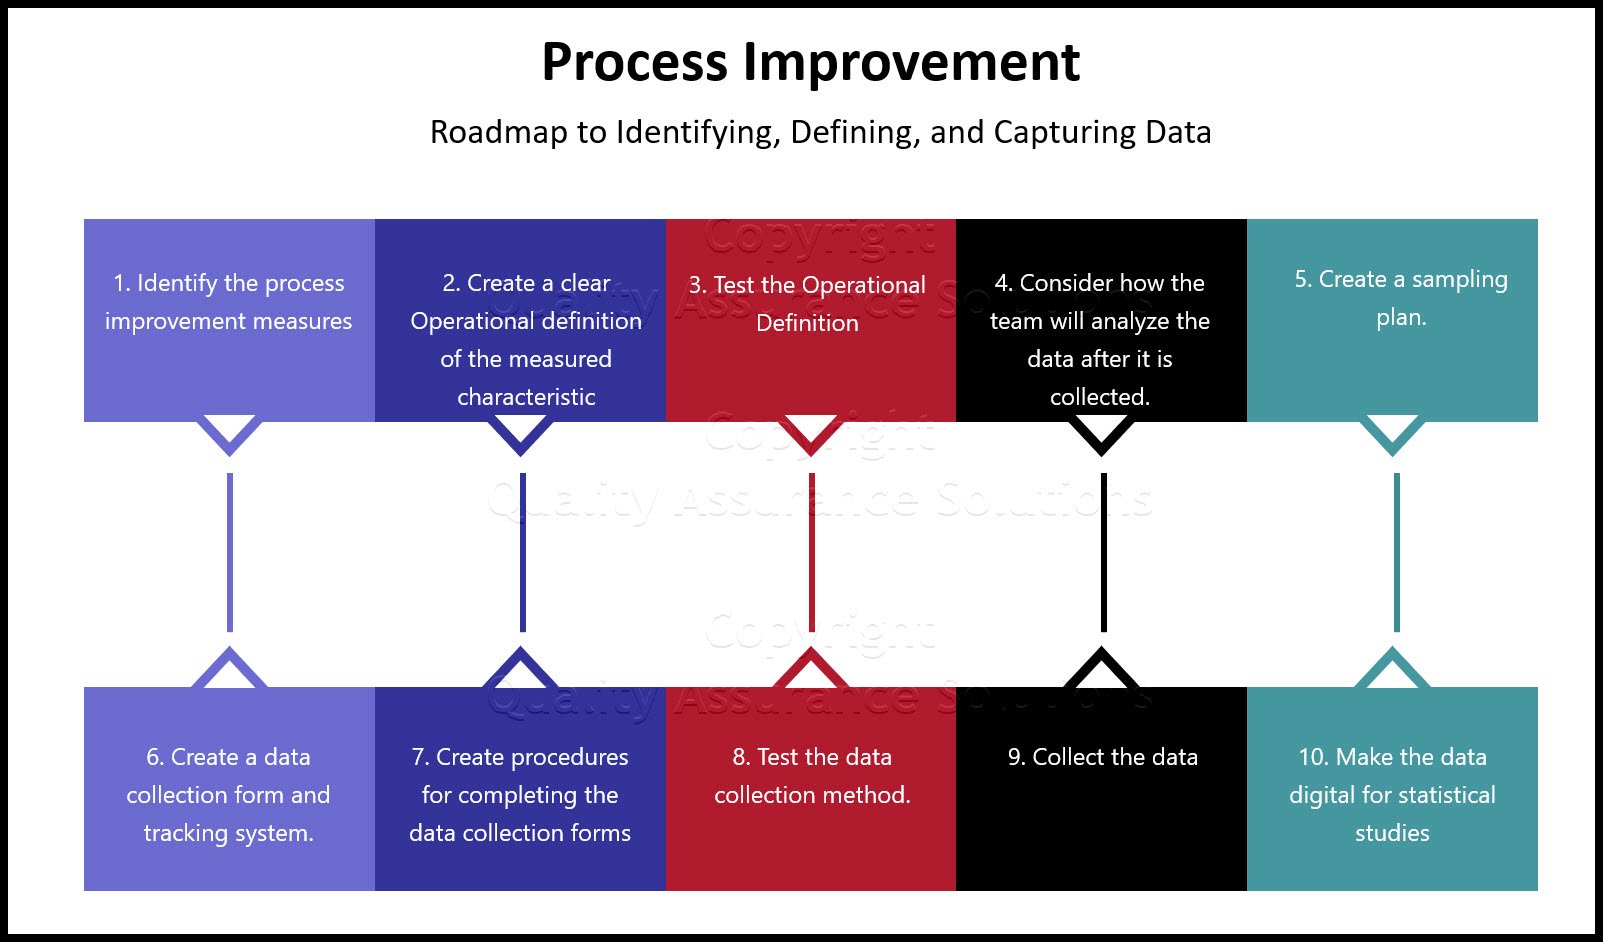 Lean Sigma is different to many traditional Process Improvement initiatives in its reliance on data to make decisions